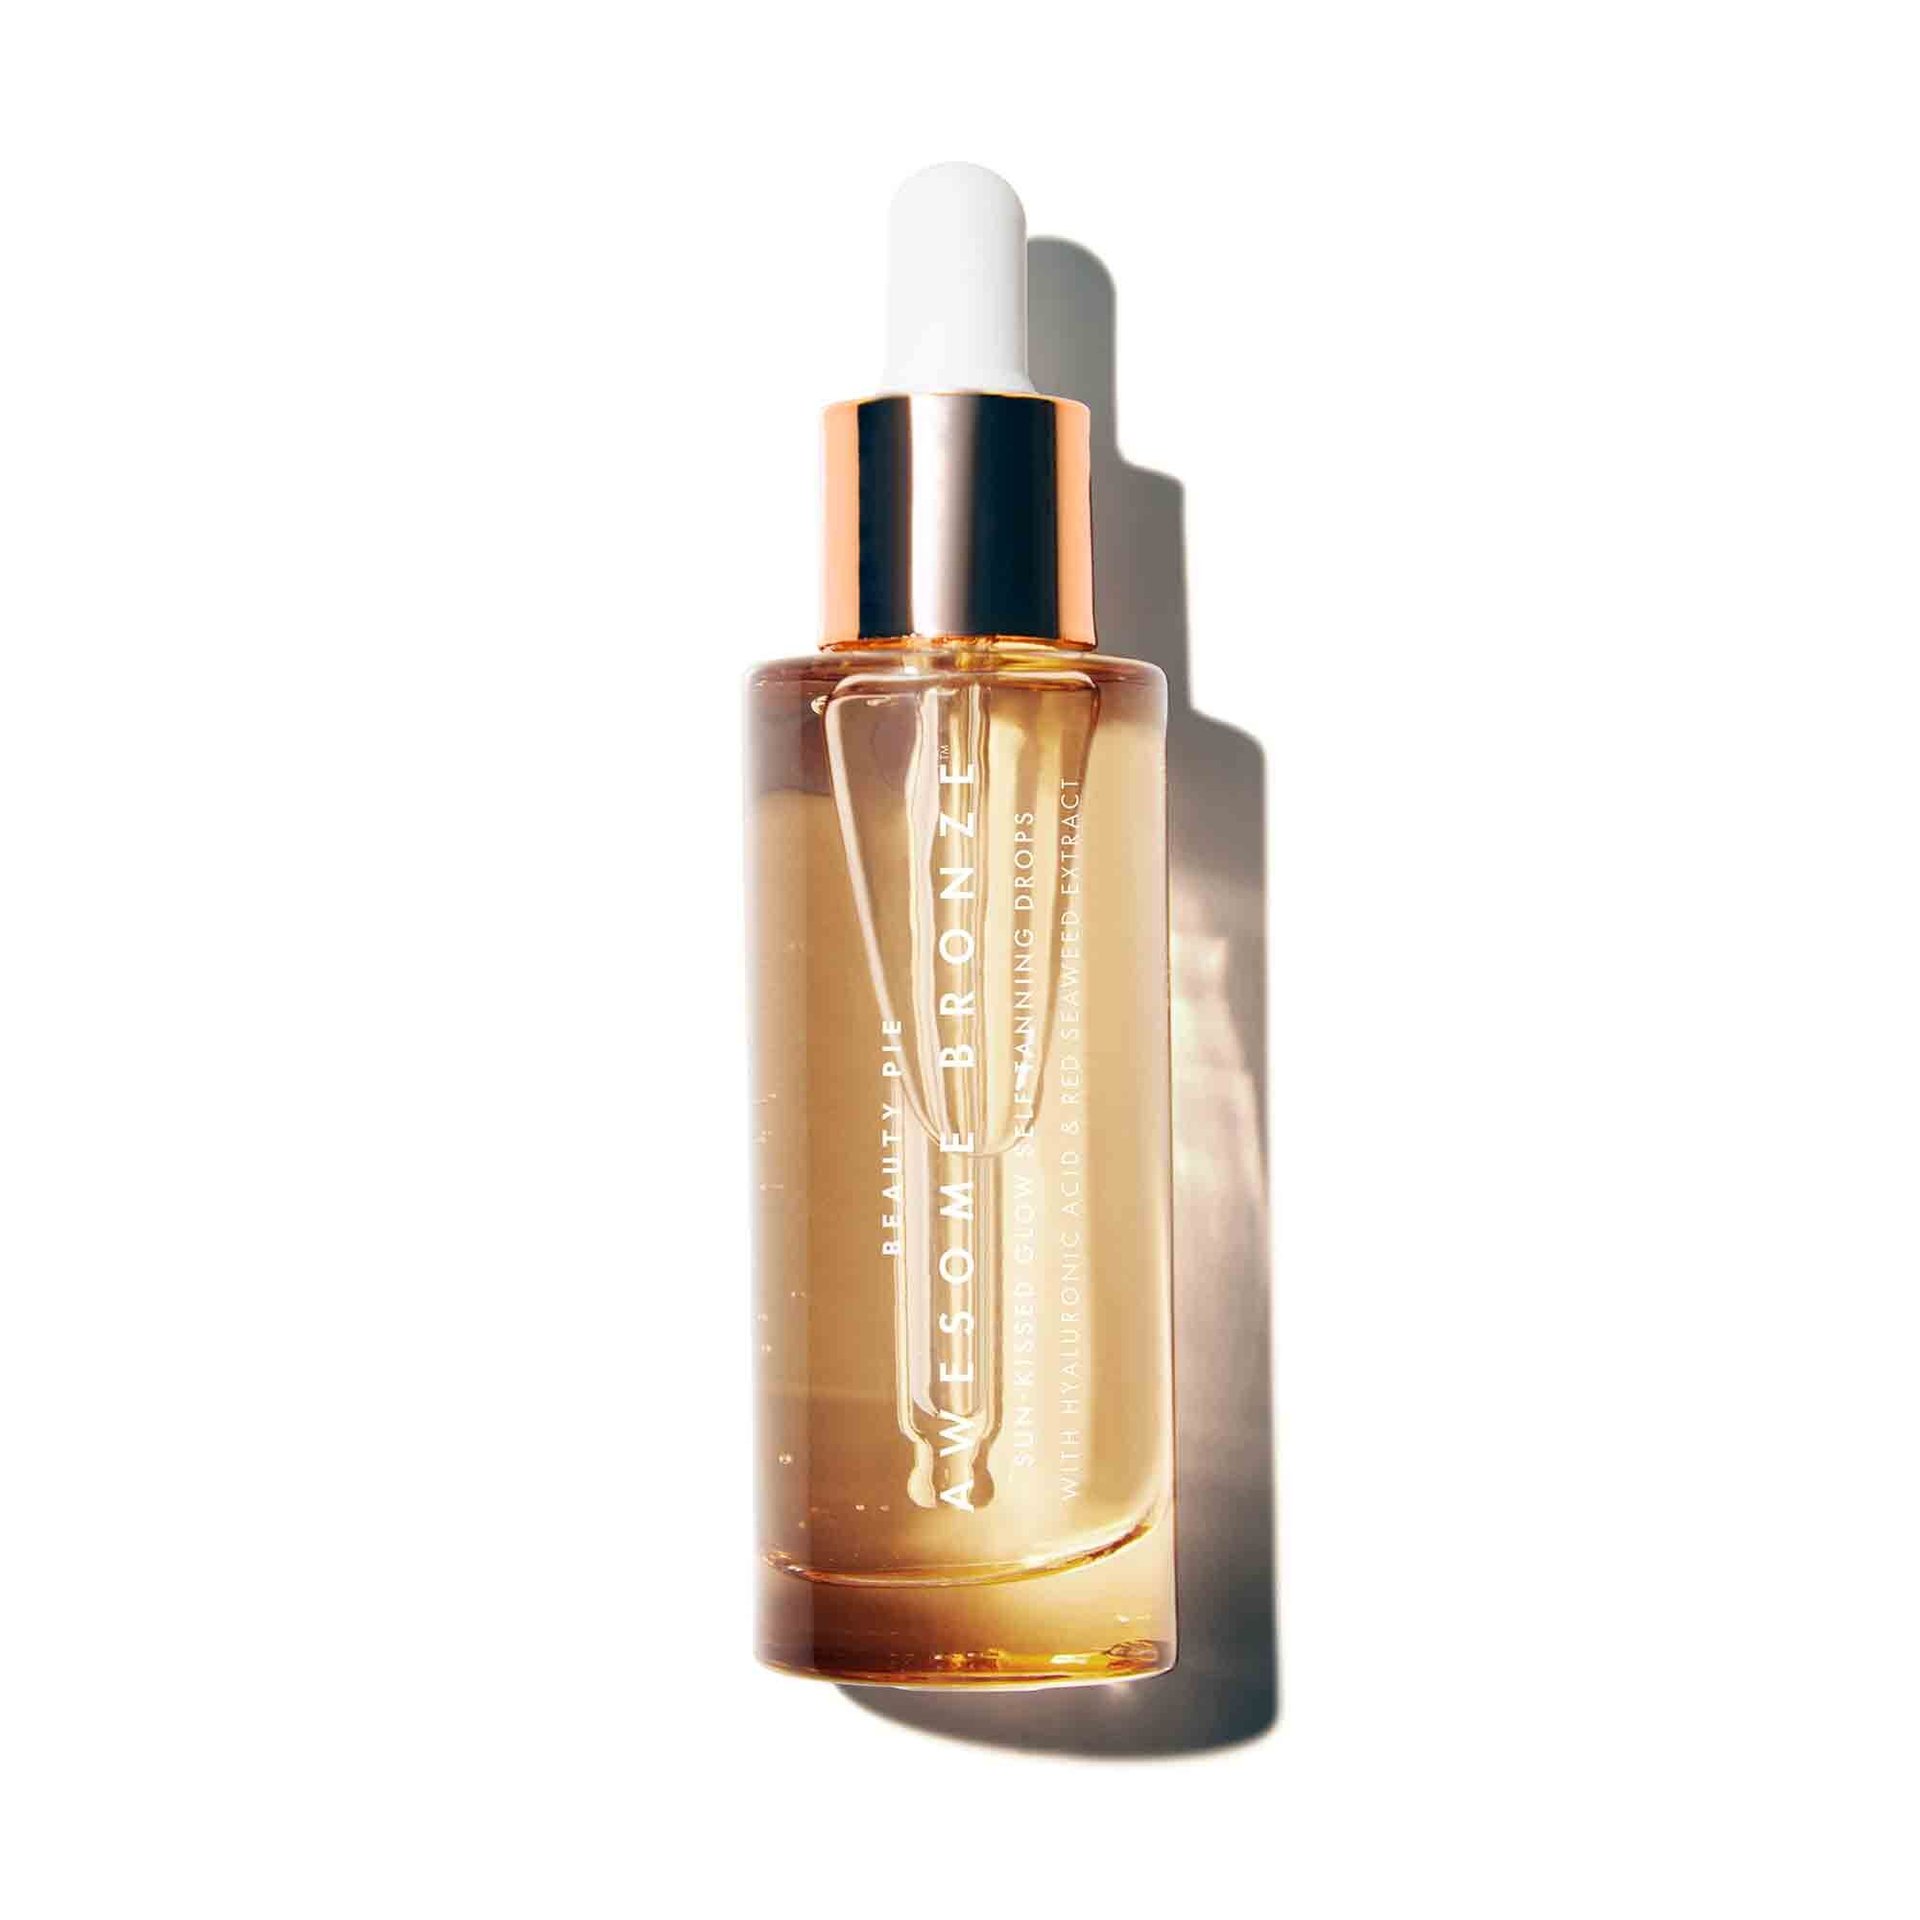 Awesome Bronze™ Self-Tanning Drops